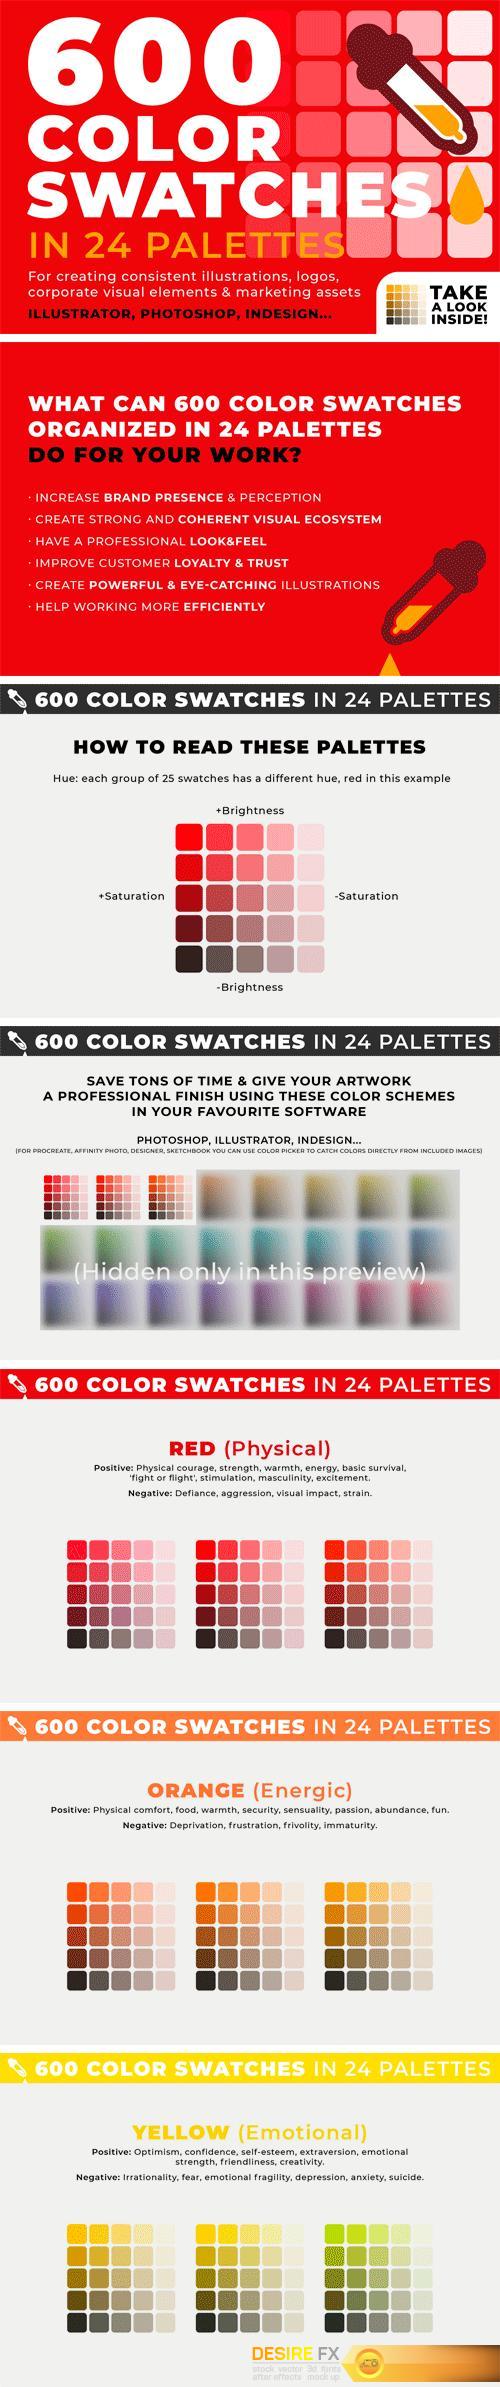 CM - 600 Color Swatches in 24 Palettes